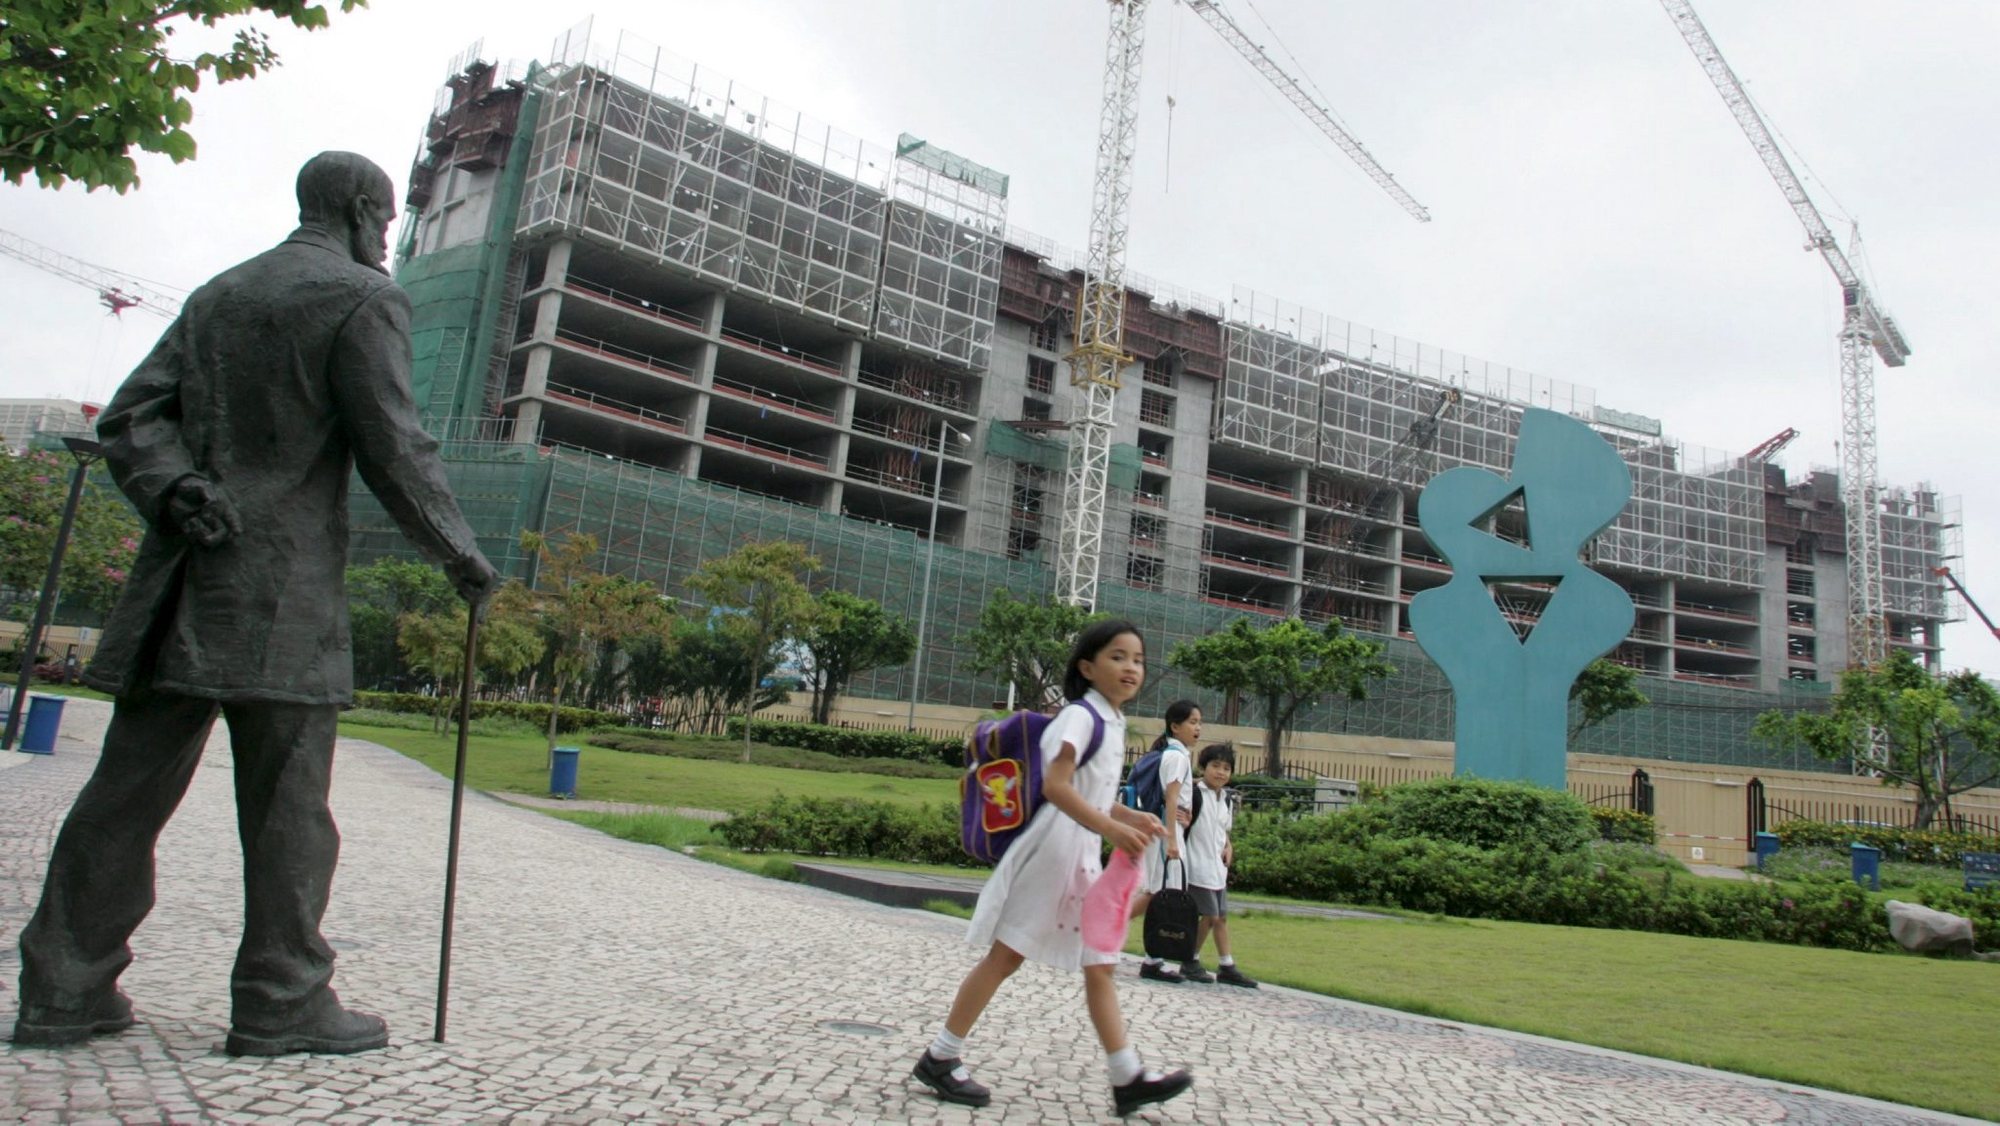 epa000420643 School children returning home walk past the construction site of the new Wynn Resorts casino in Macau, 25 April 2005. Looking on at right is a statue of the Portuguese poet, lawyer and magistrate Camillo Pessanha who died in 1926.Wynn Resorts (WYNN) announced Monday that it has been qualified to participate in the request for the proposal for an integrated resort, to be issued by the Singapore government in the second quarter of 2005. Wynn Resorts plans to open its multibillion-dollar Las Vegas casino resort, Wynn Las Vegas, on April 28 2005, and it&#039;s US$700 million Macau casino on the 6.5 hectare site to the public by the autumn of 2006.  EPA/STRINGER